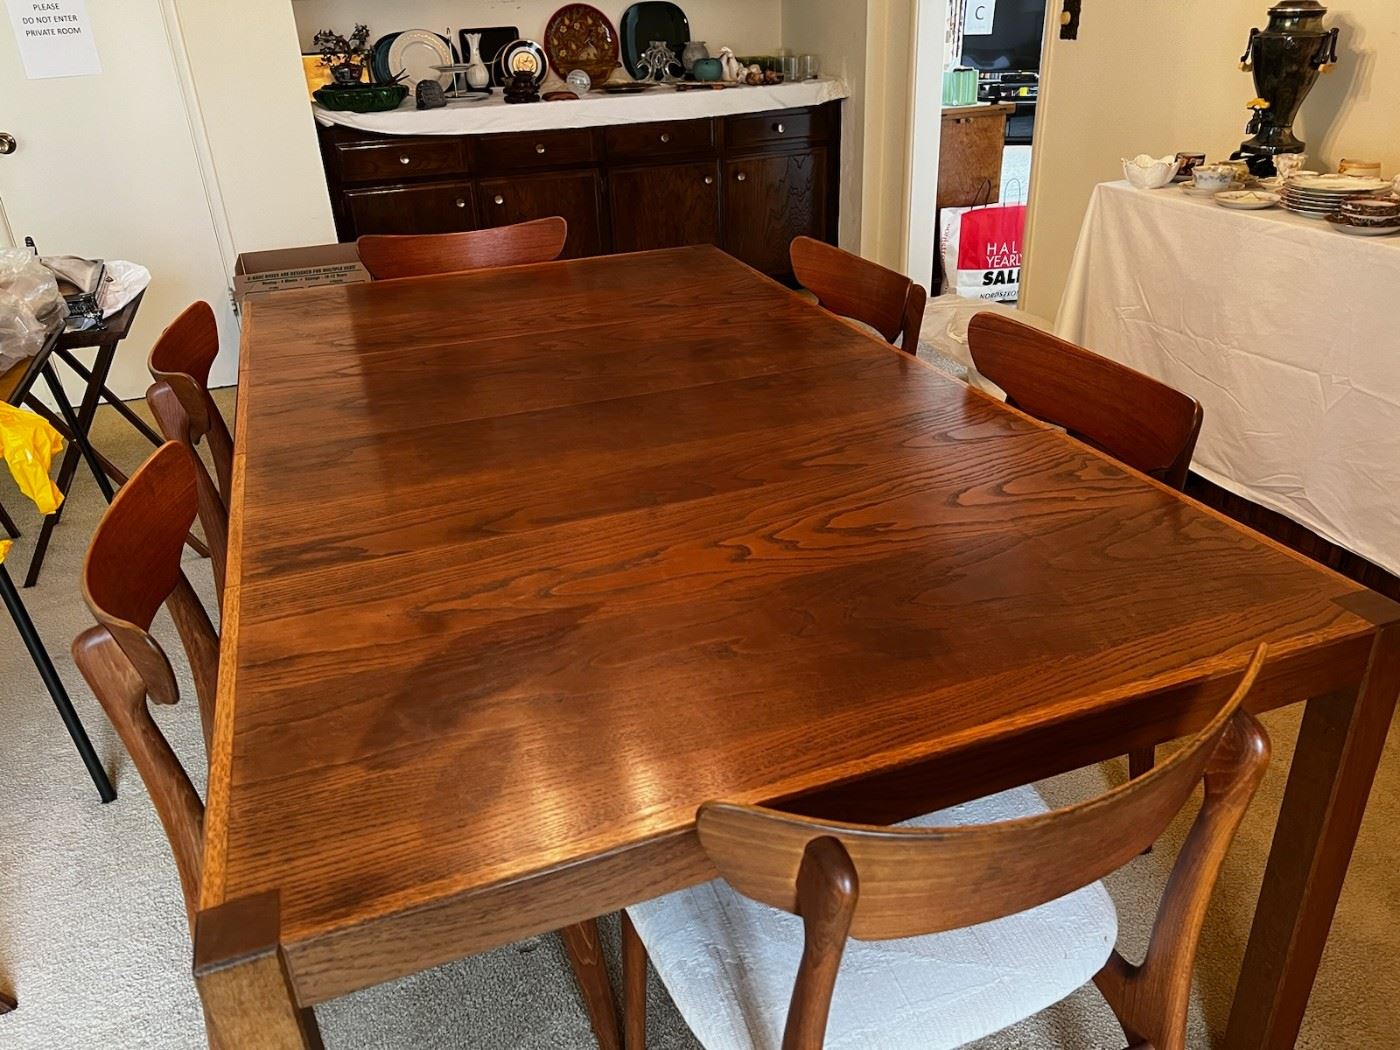 75" Scandinavian teak dining table with 6 chairs